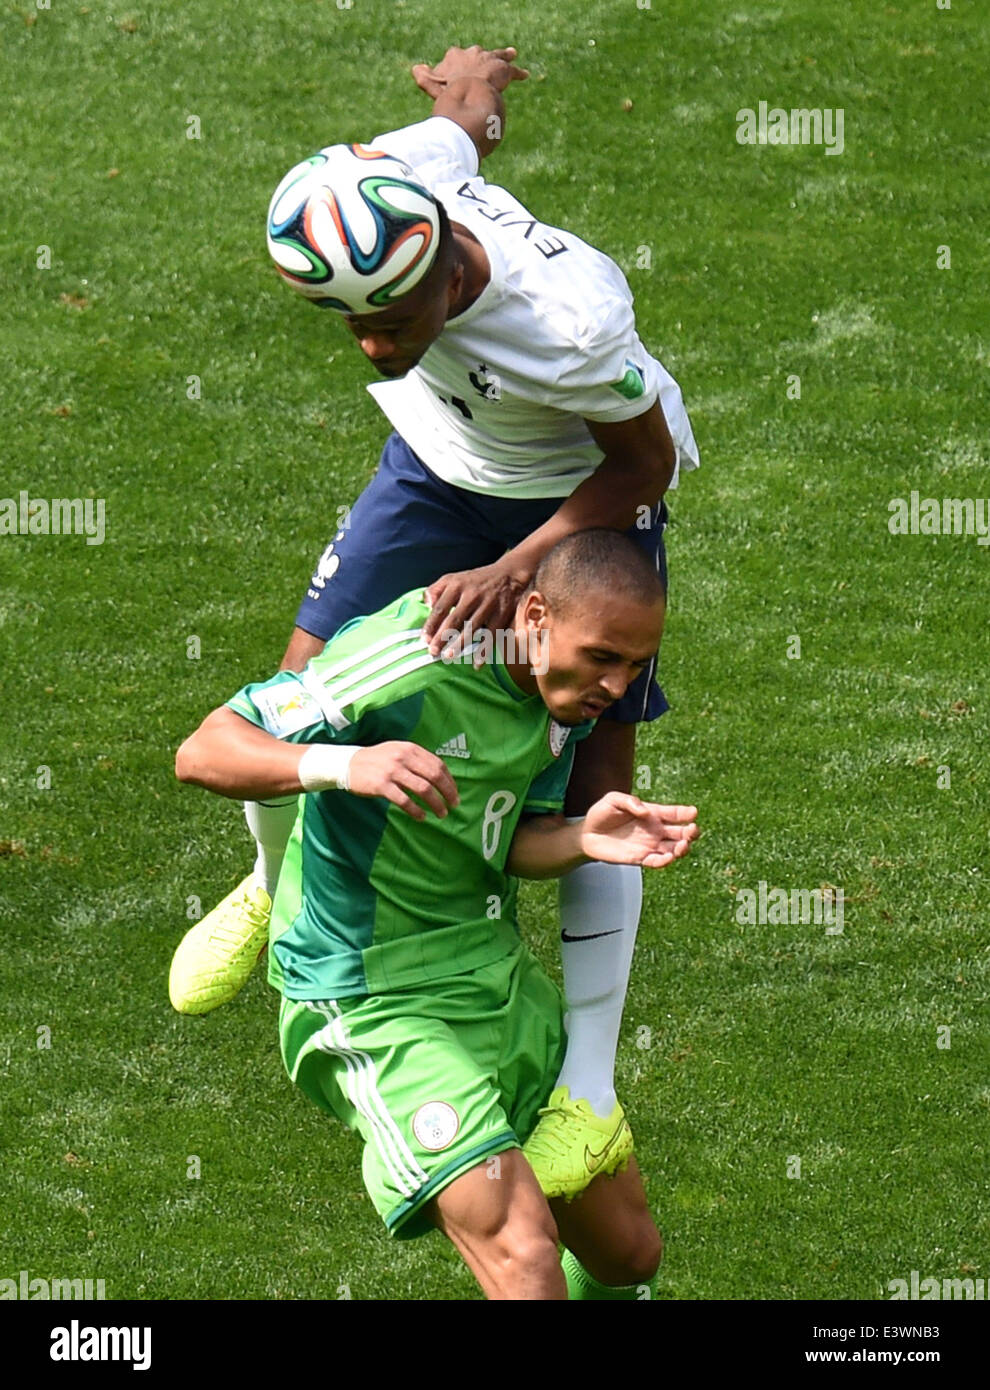 Brasilia, Brazil. 30th June, 2014. France's Patrice Evra vies with Nigeria's Peter Osaze Odemwingie during a Round of 16 match between France and Nigeria of 2014 FIFA World Cup at the Estadio Nacional Stadium in Brasilia, Brazil, on June 30, 2014. Credit:  Liu Dawei/Xinhua/Alamy Live News Stock Photo